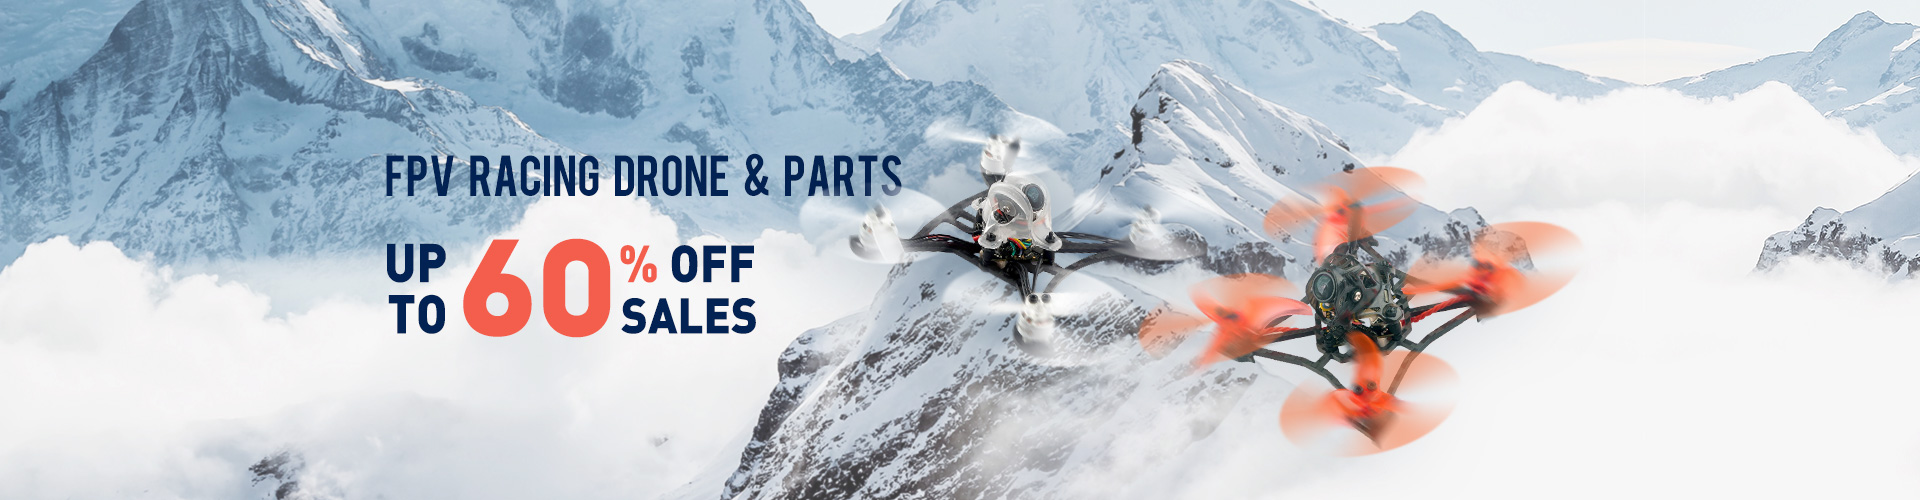 Up To 60% Off for FPV Racing Drone& Parts